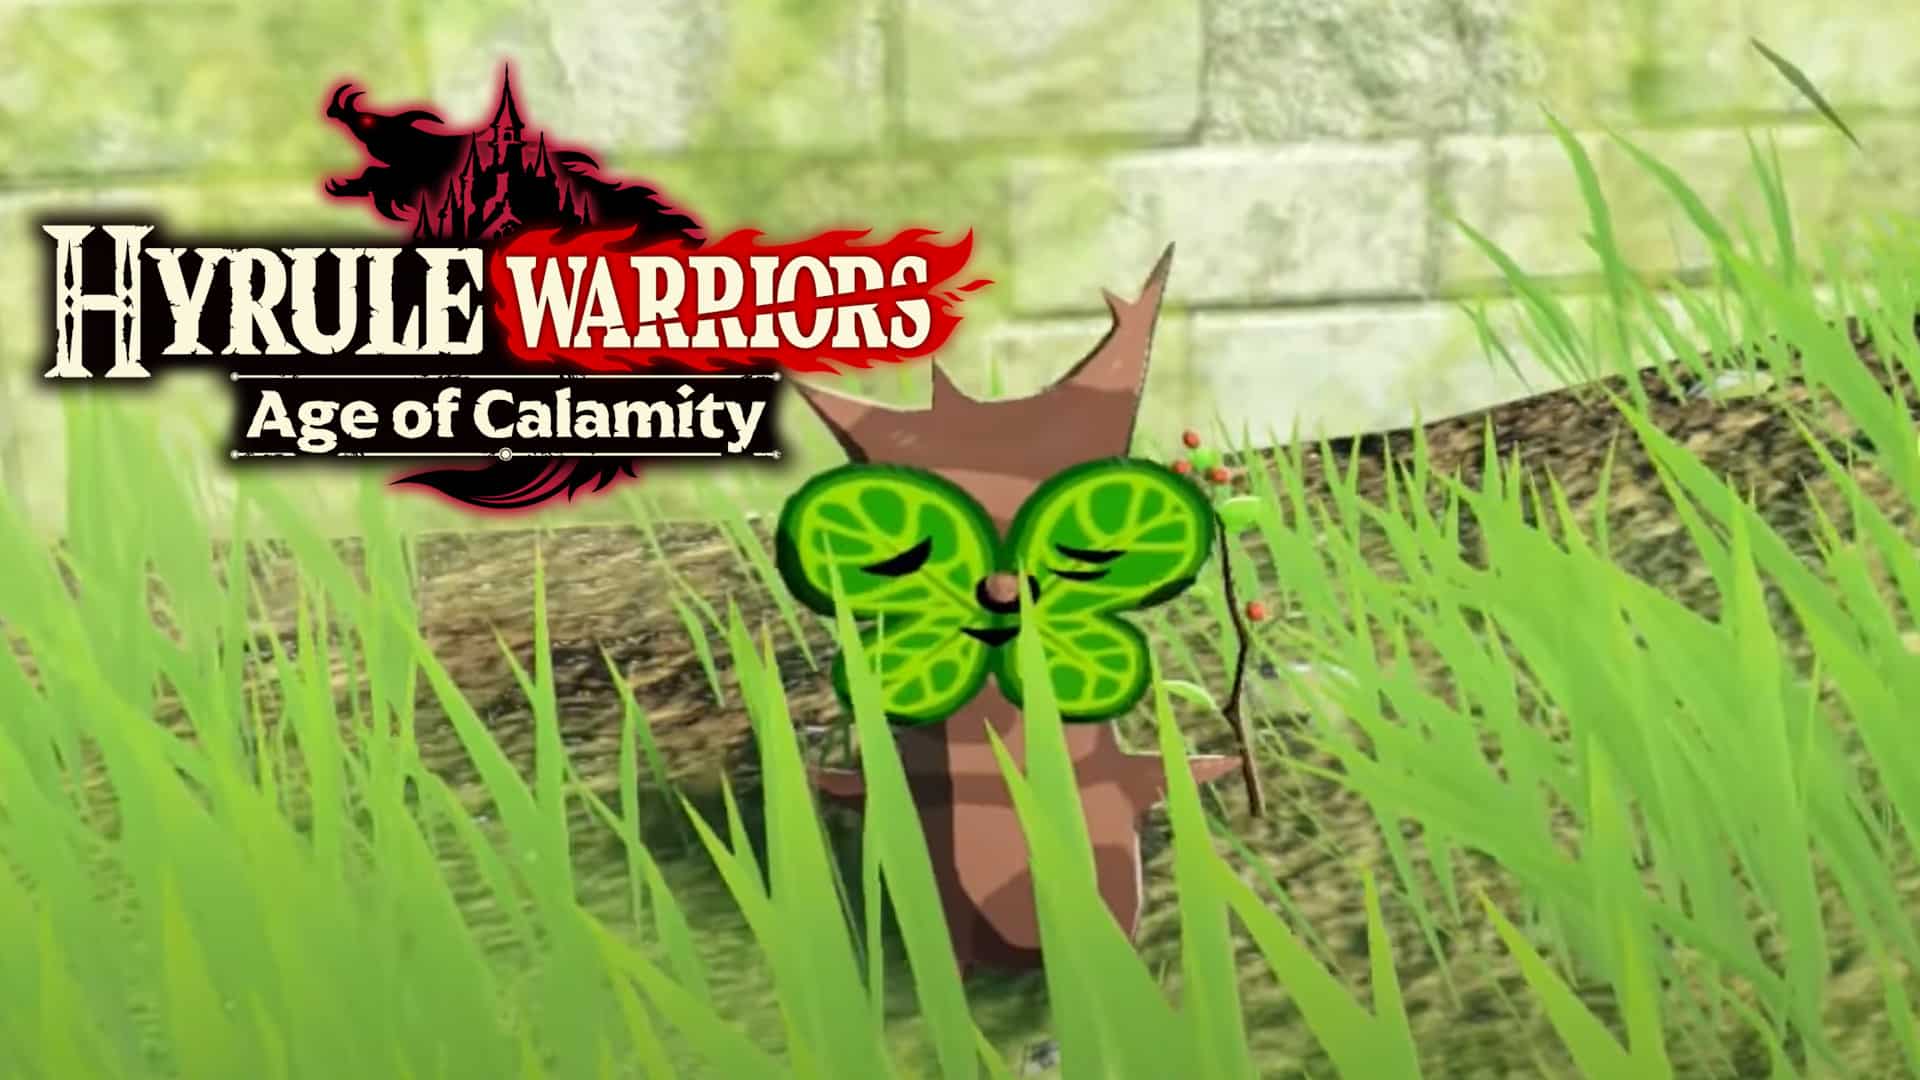 Hyrule Warriors: Age of Calamity Korok Seeds Locations Guide